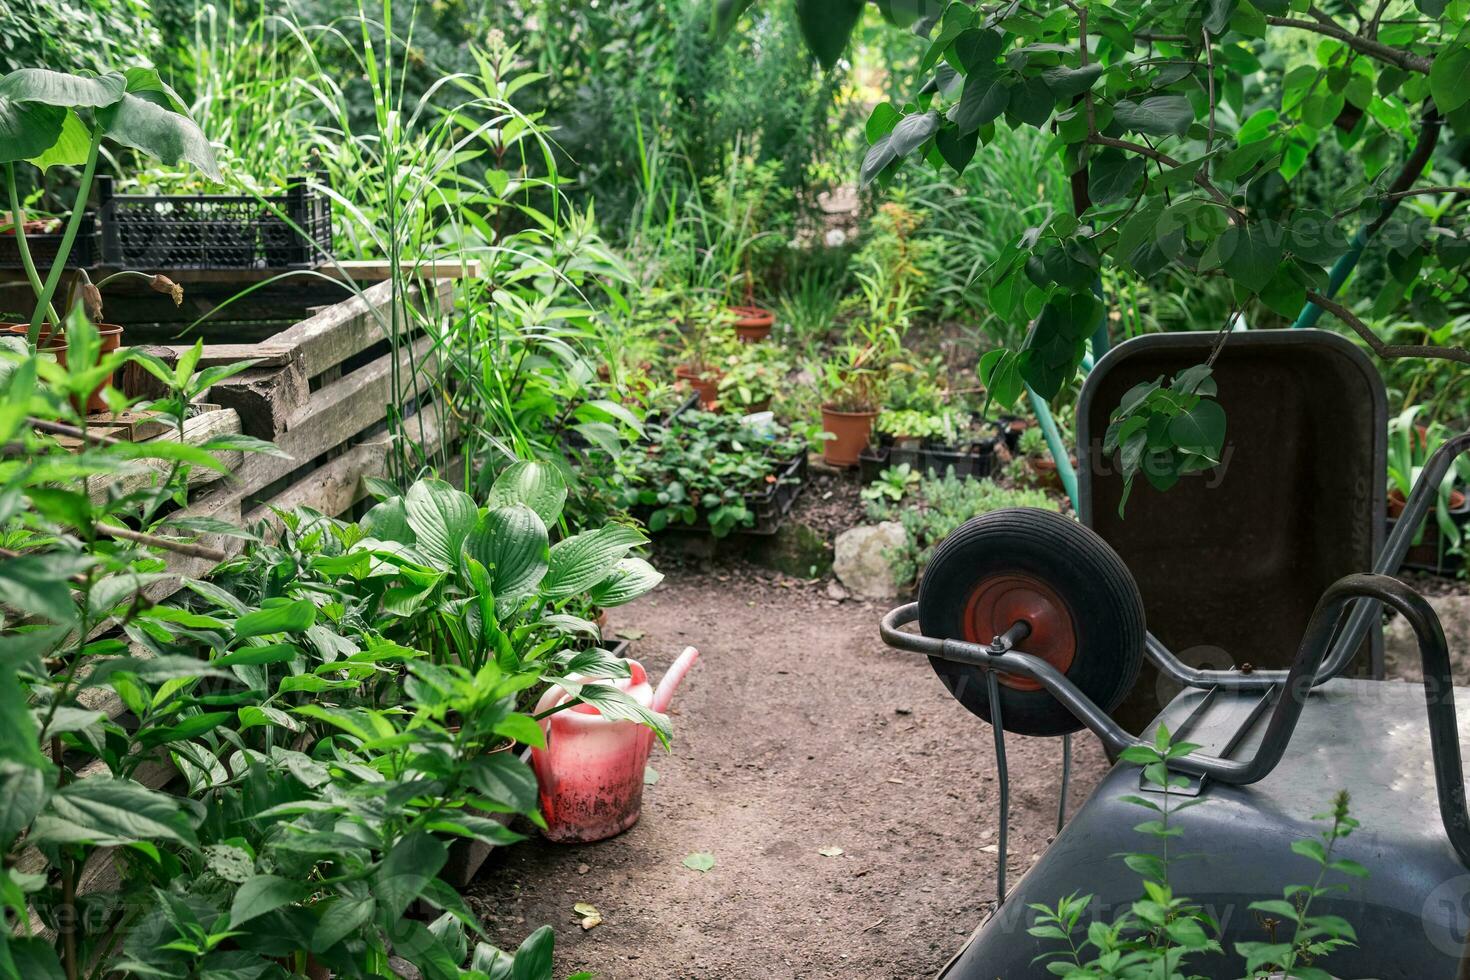 gardening tools, wheelbarrows and watering can among plants in the garden photo